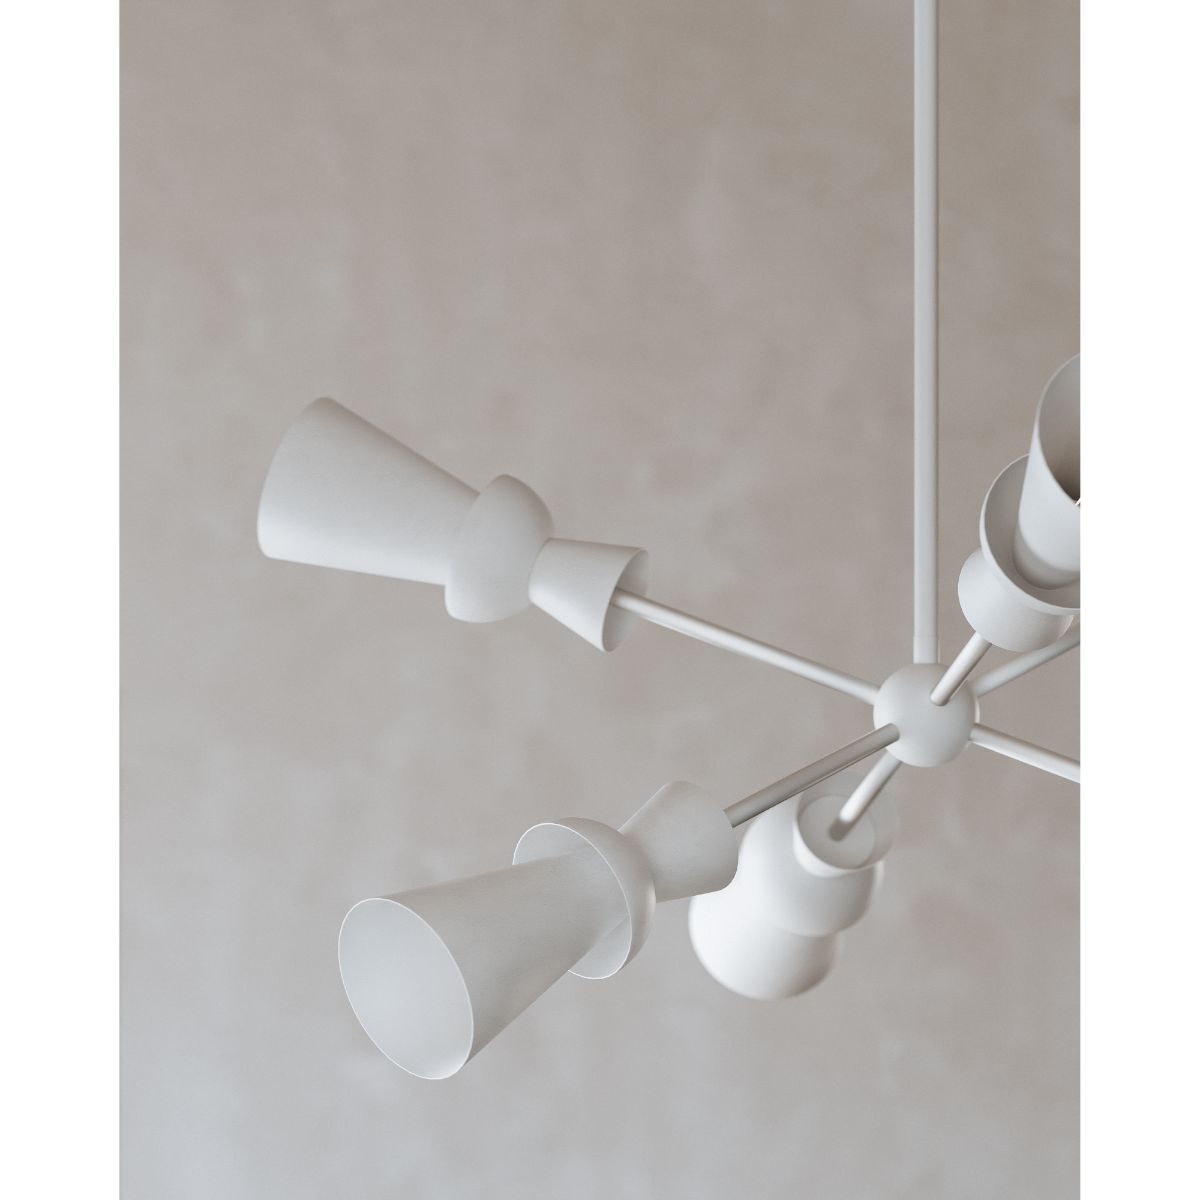 FLORENCE 6 lights Chandelier White finish